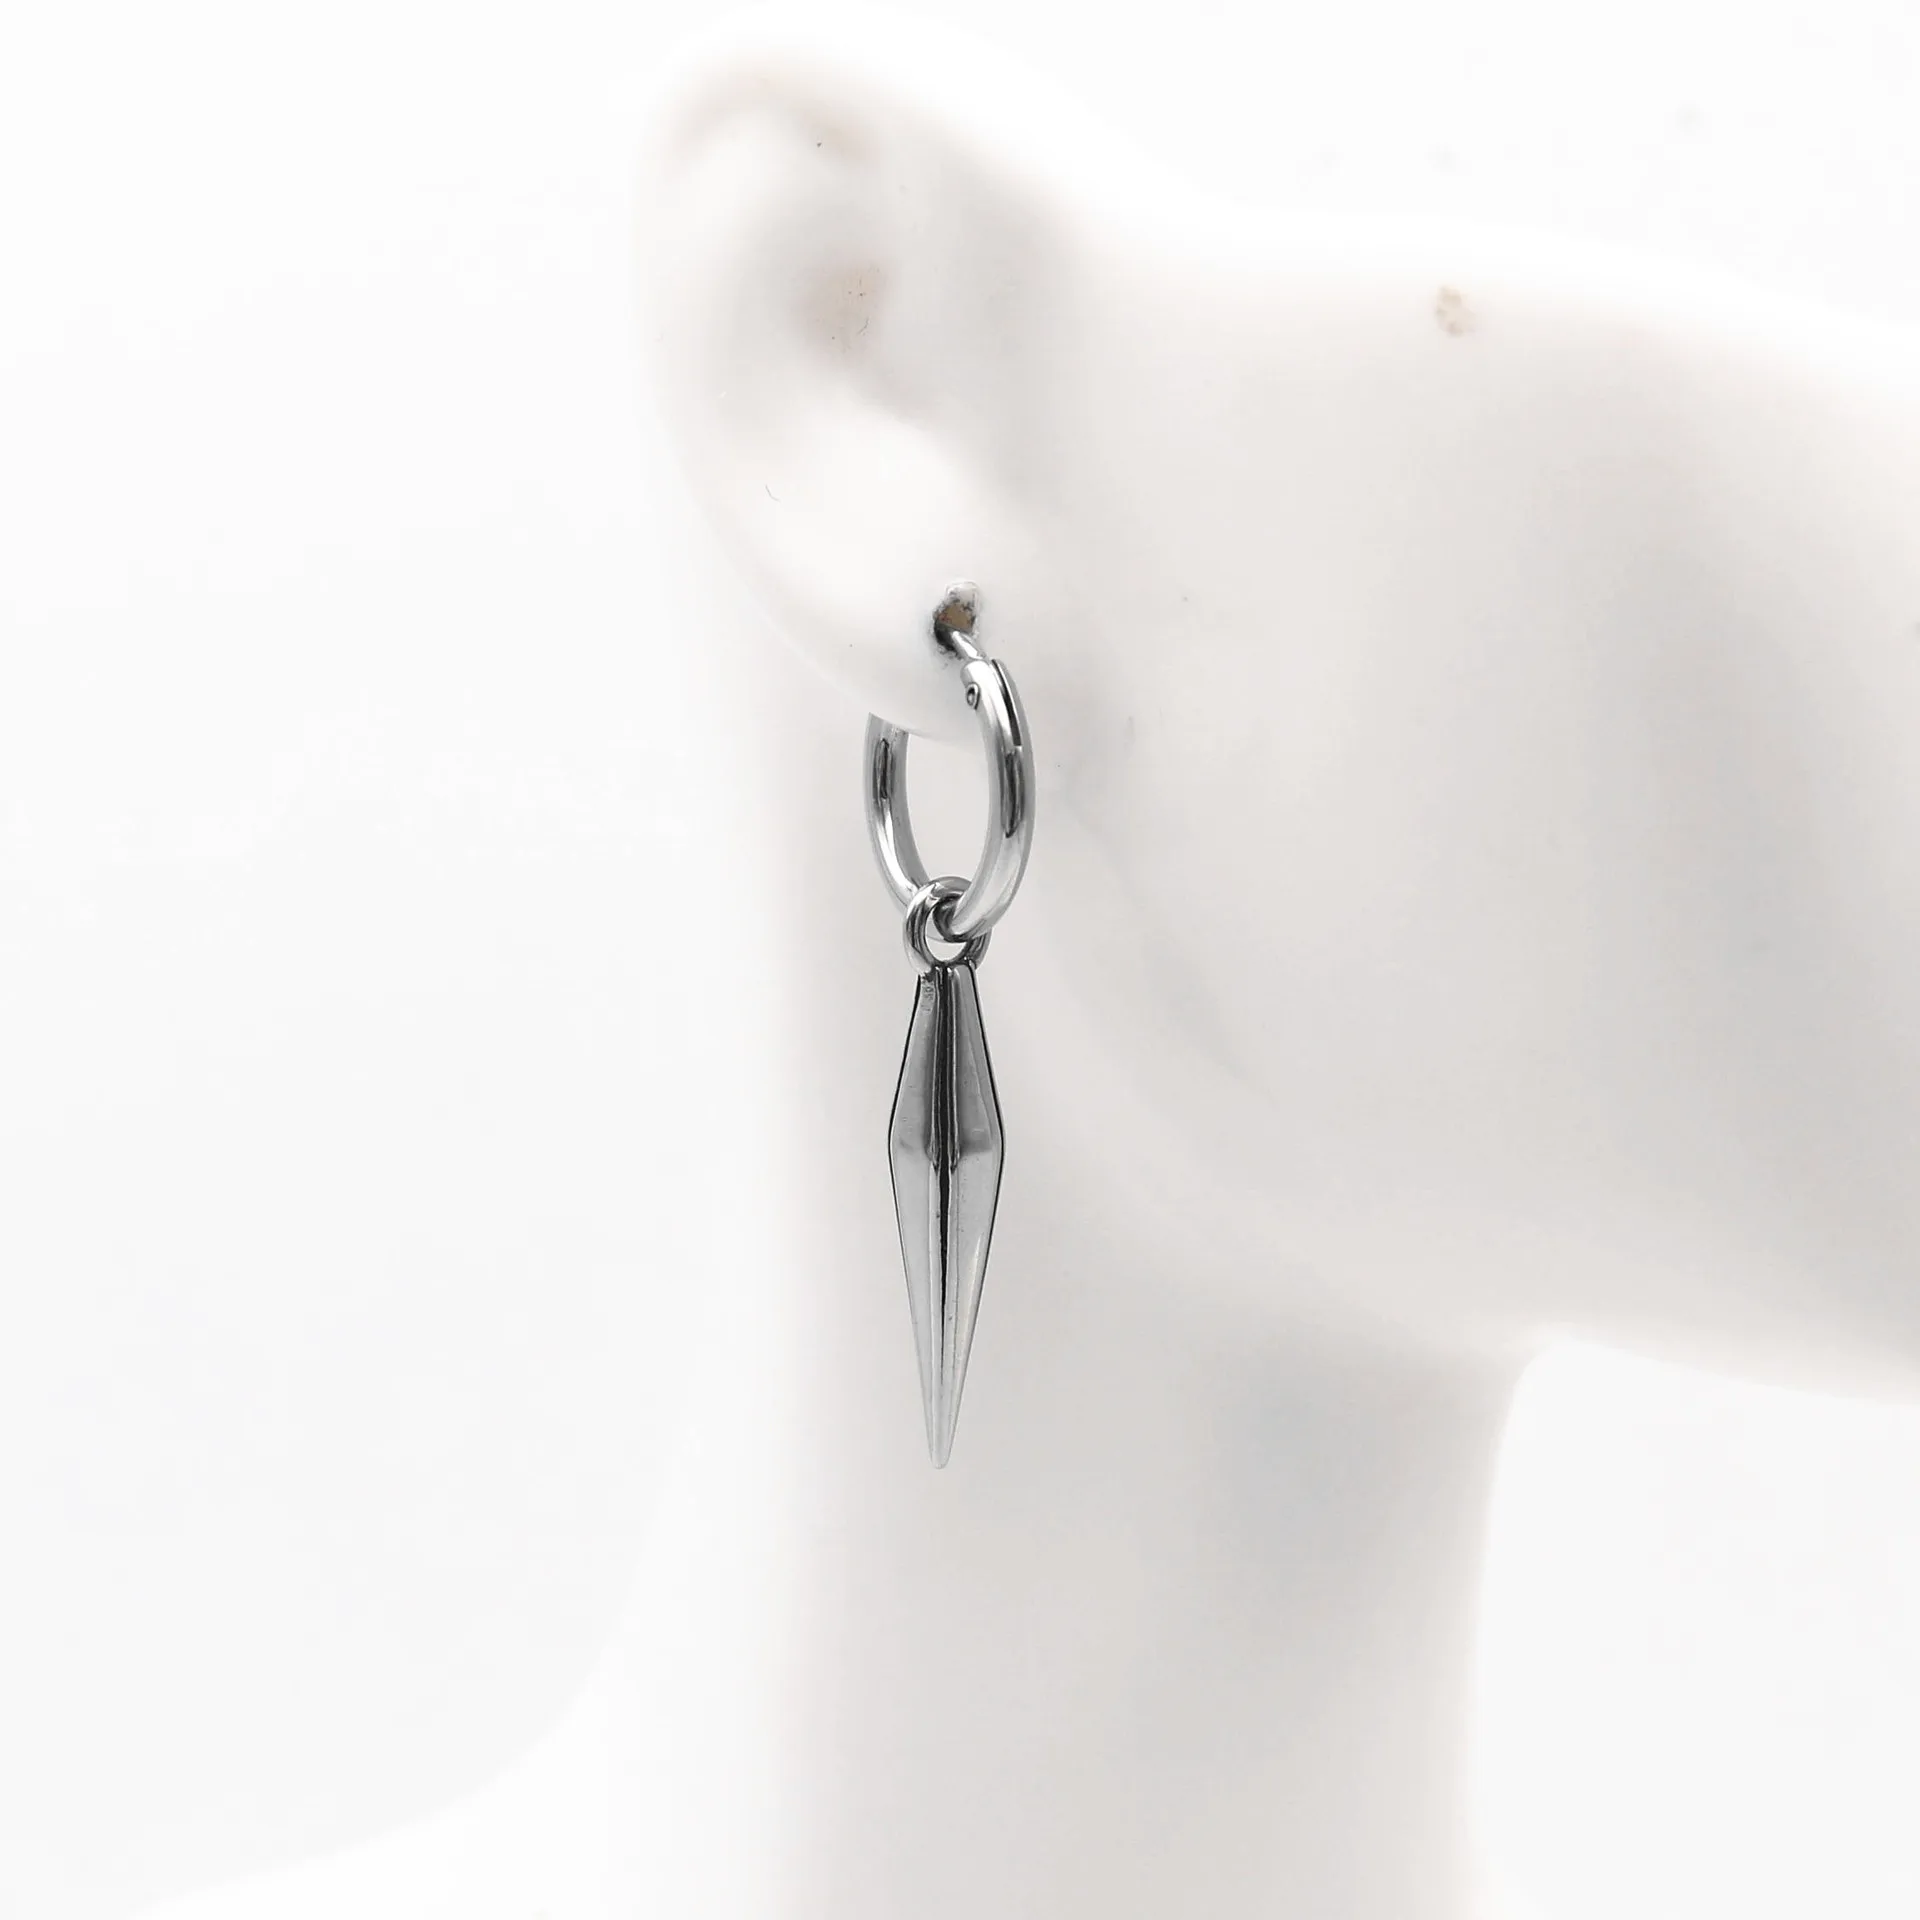 Large Hoop Exaggerated Silver Awl Earrings